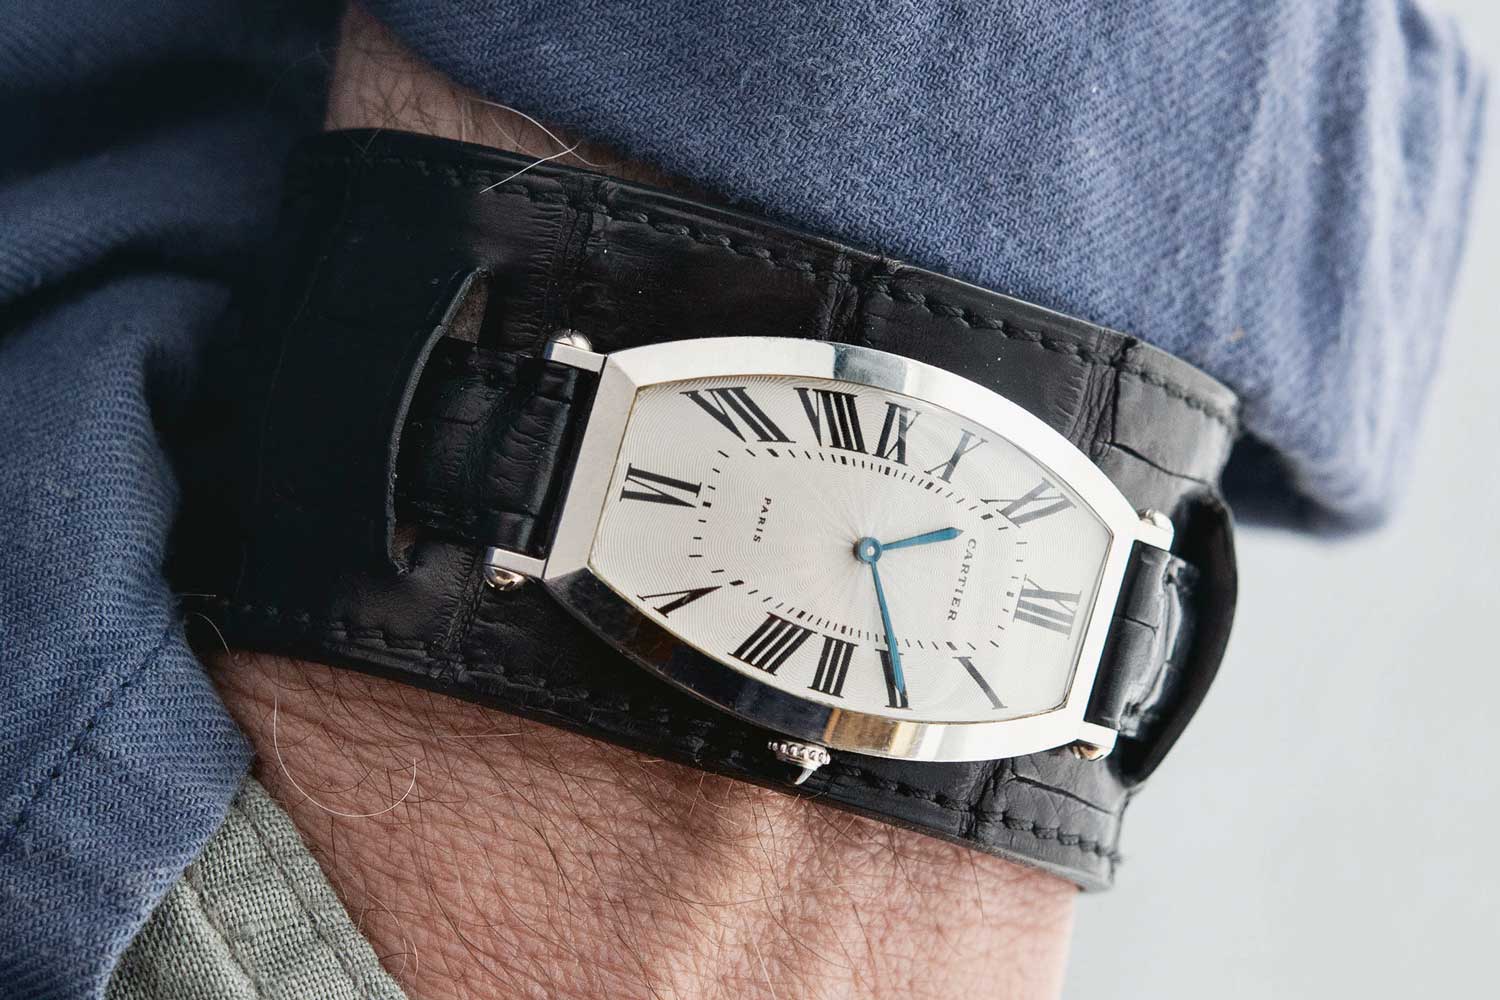 Bulang style for watch lovers — watches and accessories such as this platinum Cartier Tonneau on black leather cuff strap (Image: Bulang and Sons)